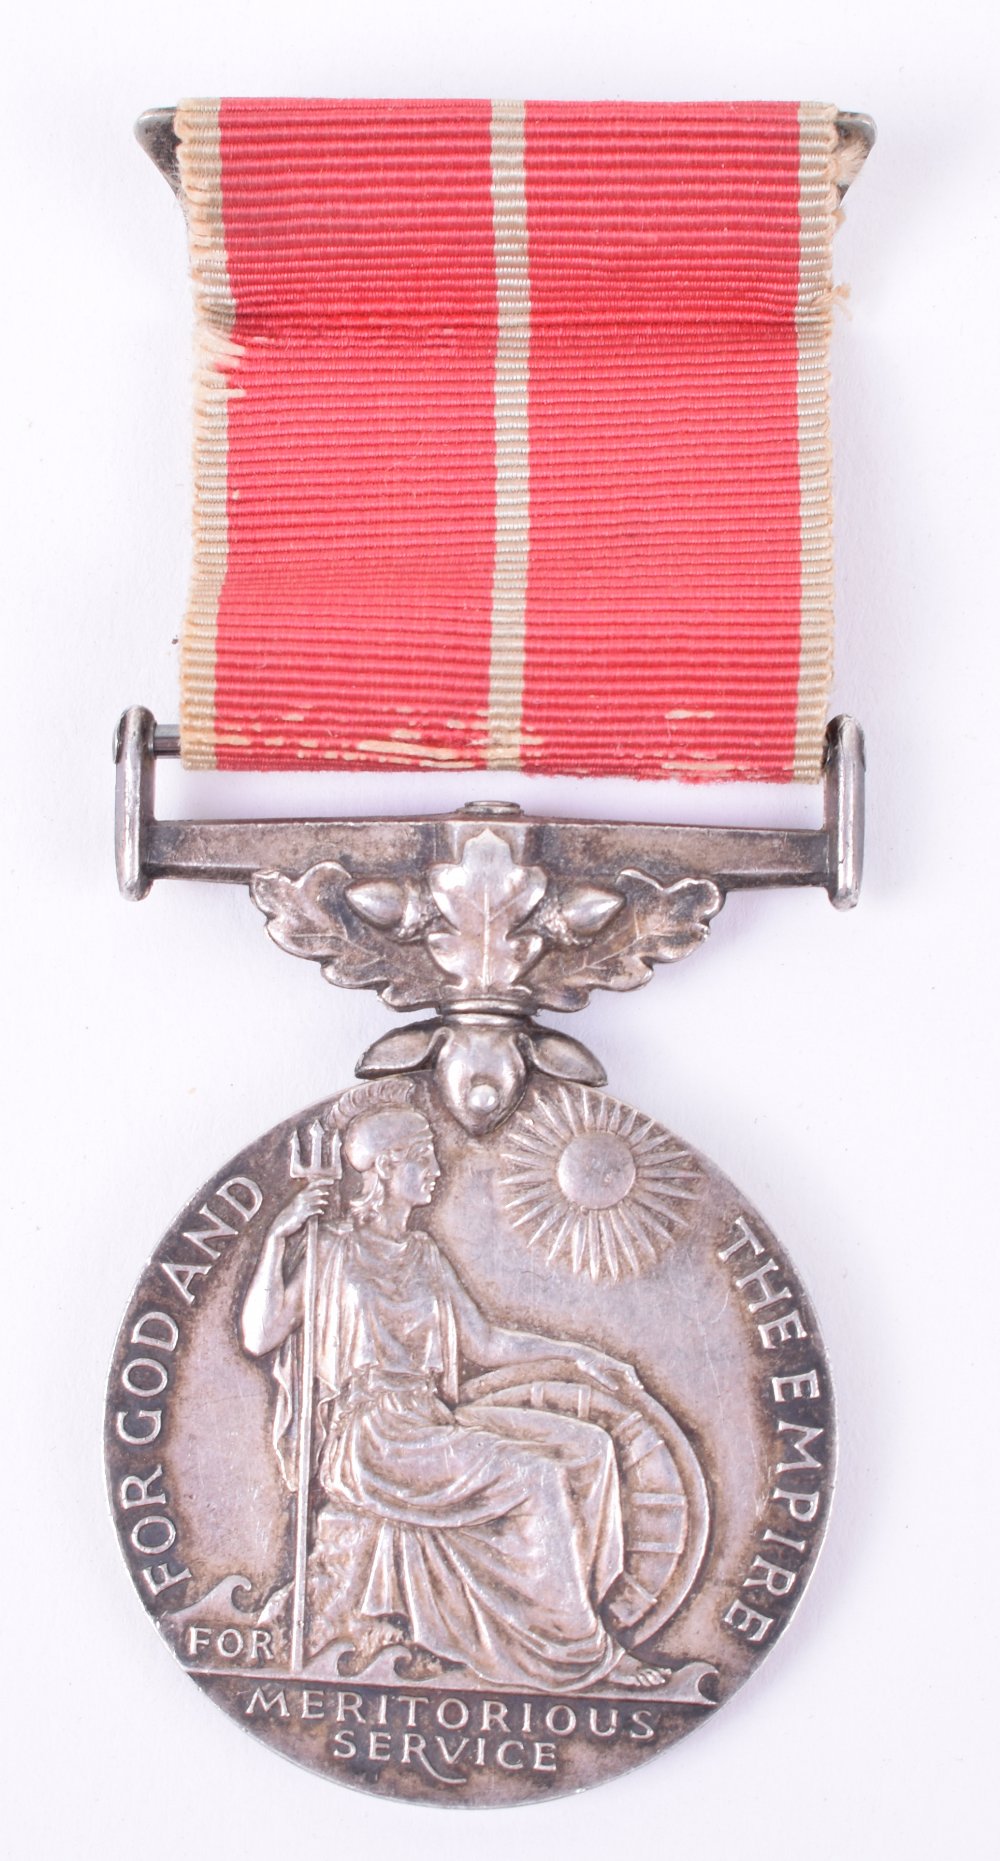 WW2 British Empire Medal Awarded to Chief Stoker William John Miller Royal Navy, For Saving a Mercha - Image 2 of 5